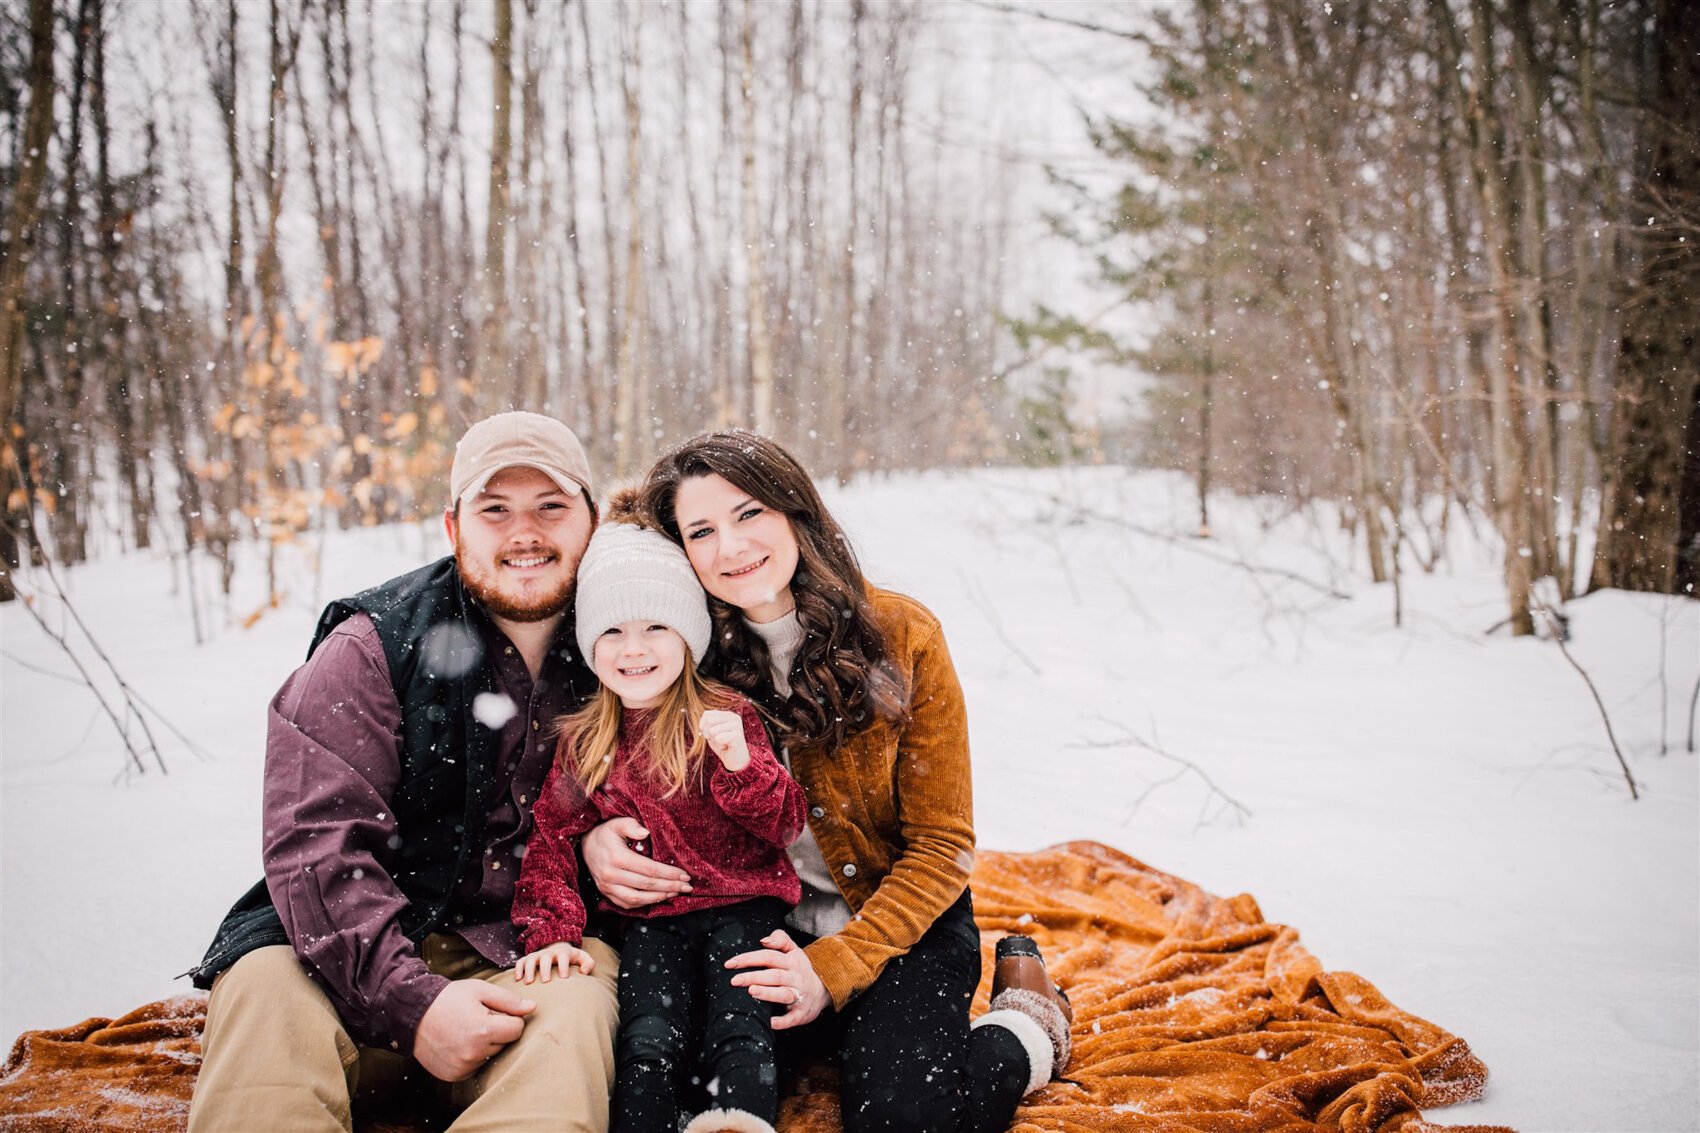 Carlie-and-Joe-Engagement-Pictures-Winter-2020-2.jpg